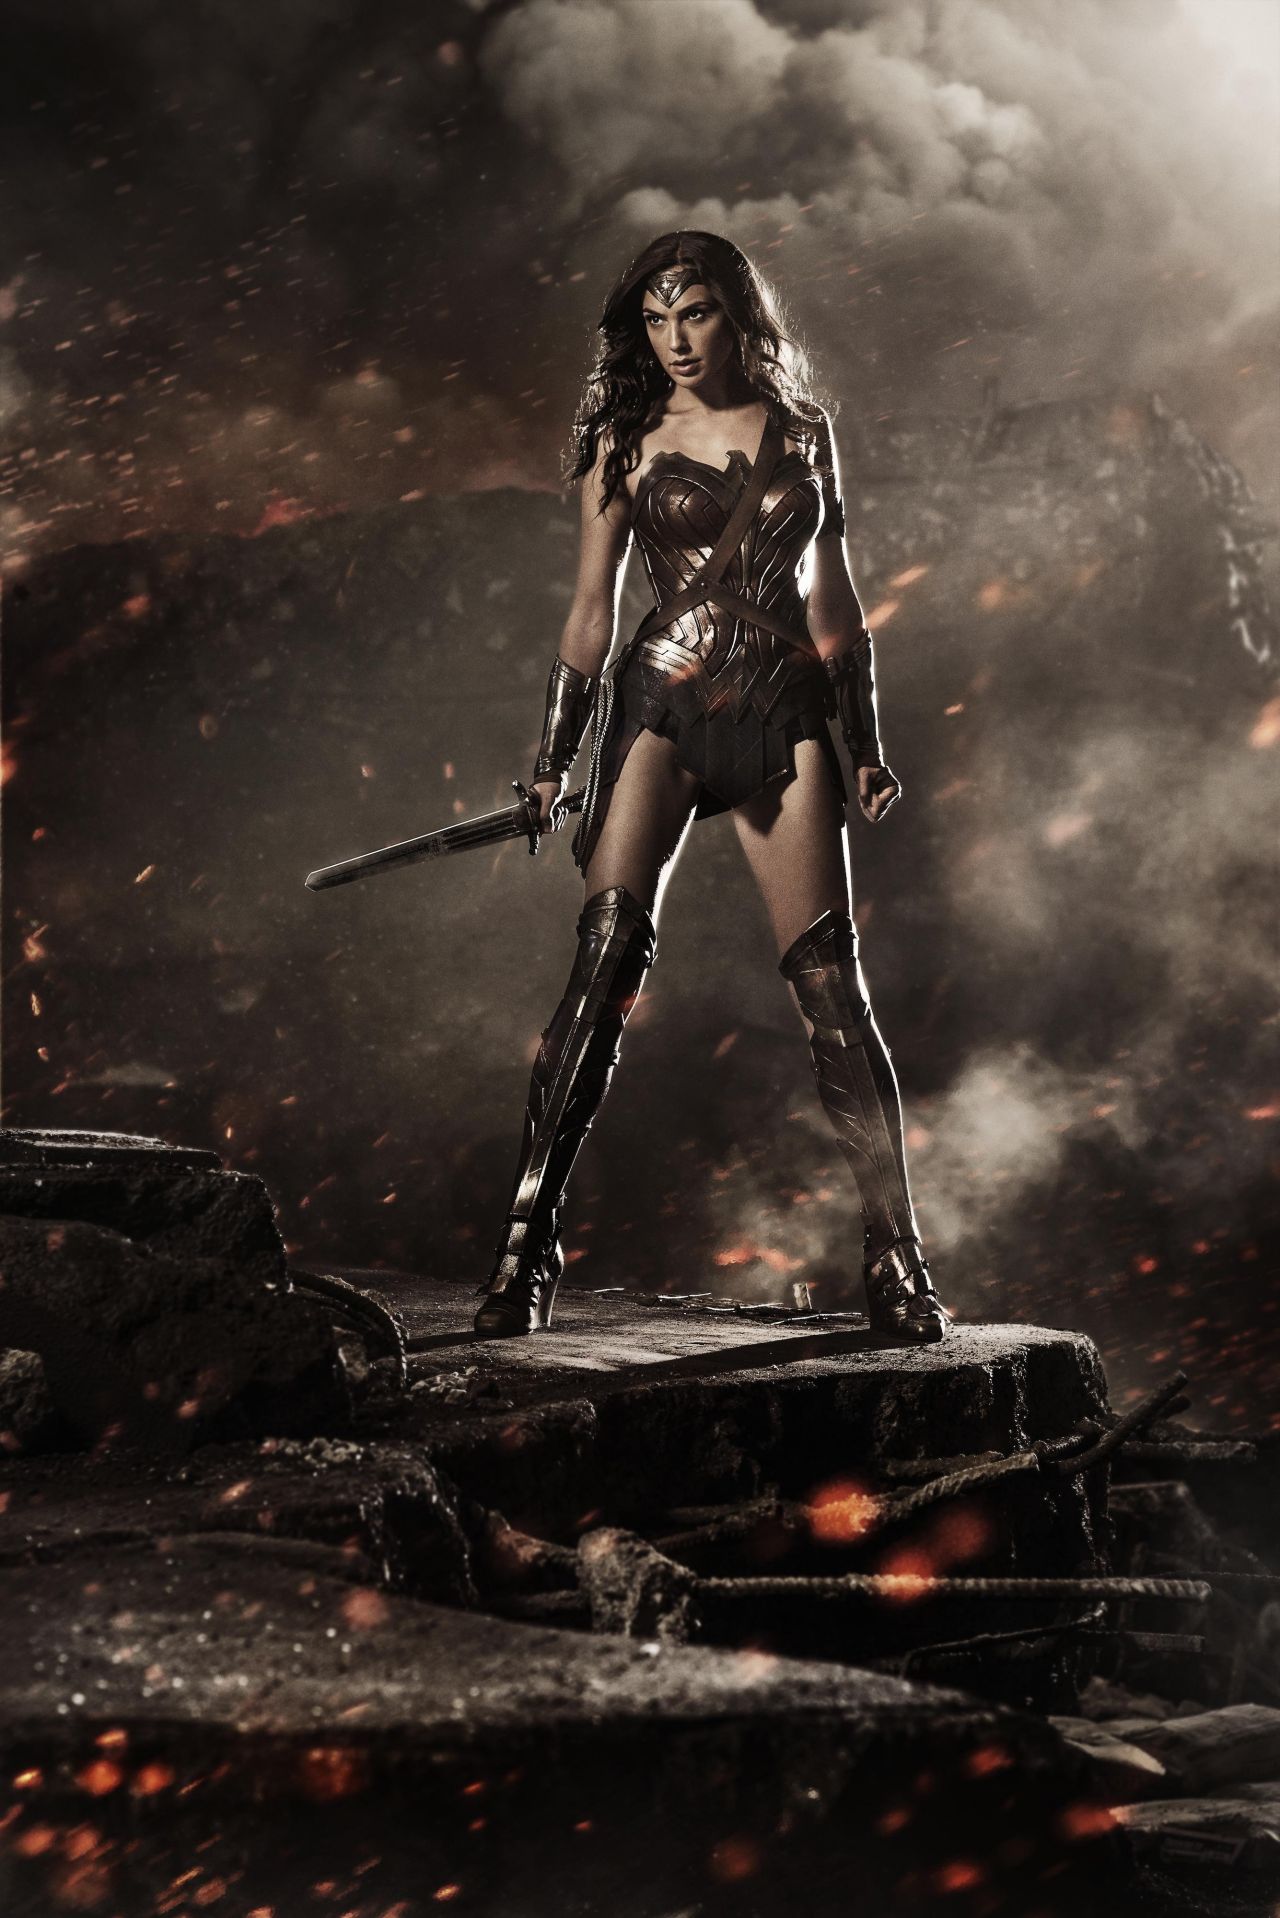 Gal Gadot - Wonder Woman Image Release at Comic-Con 2014 in San Diego